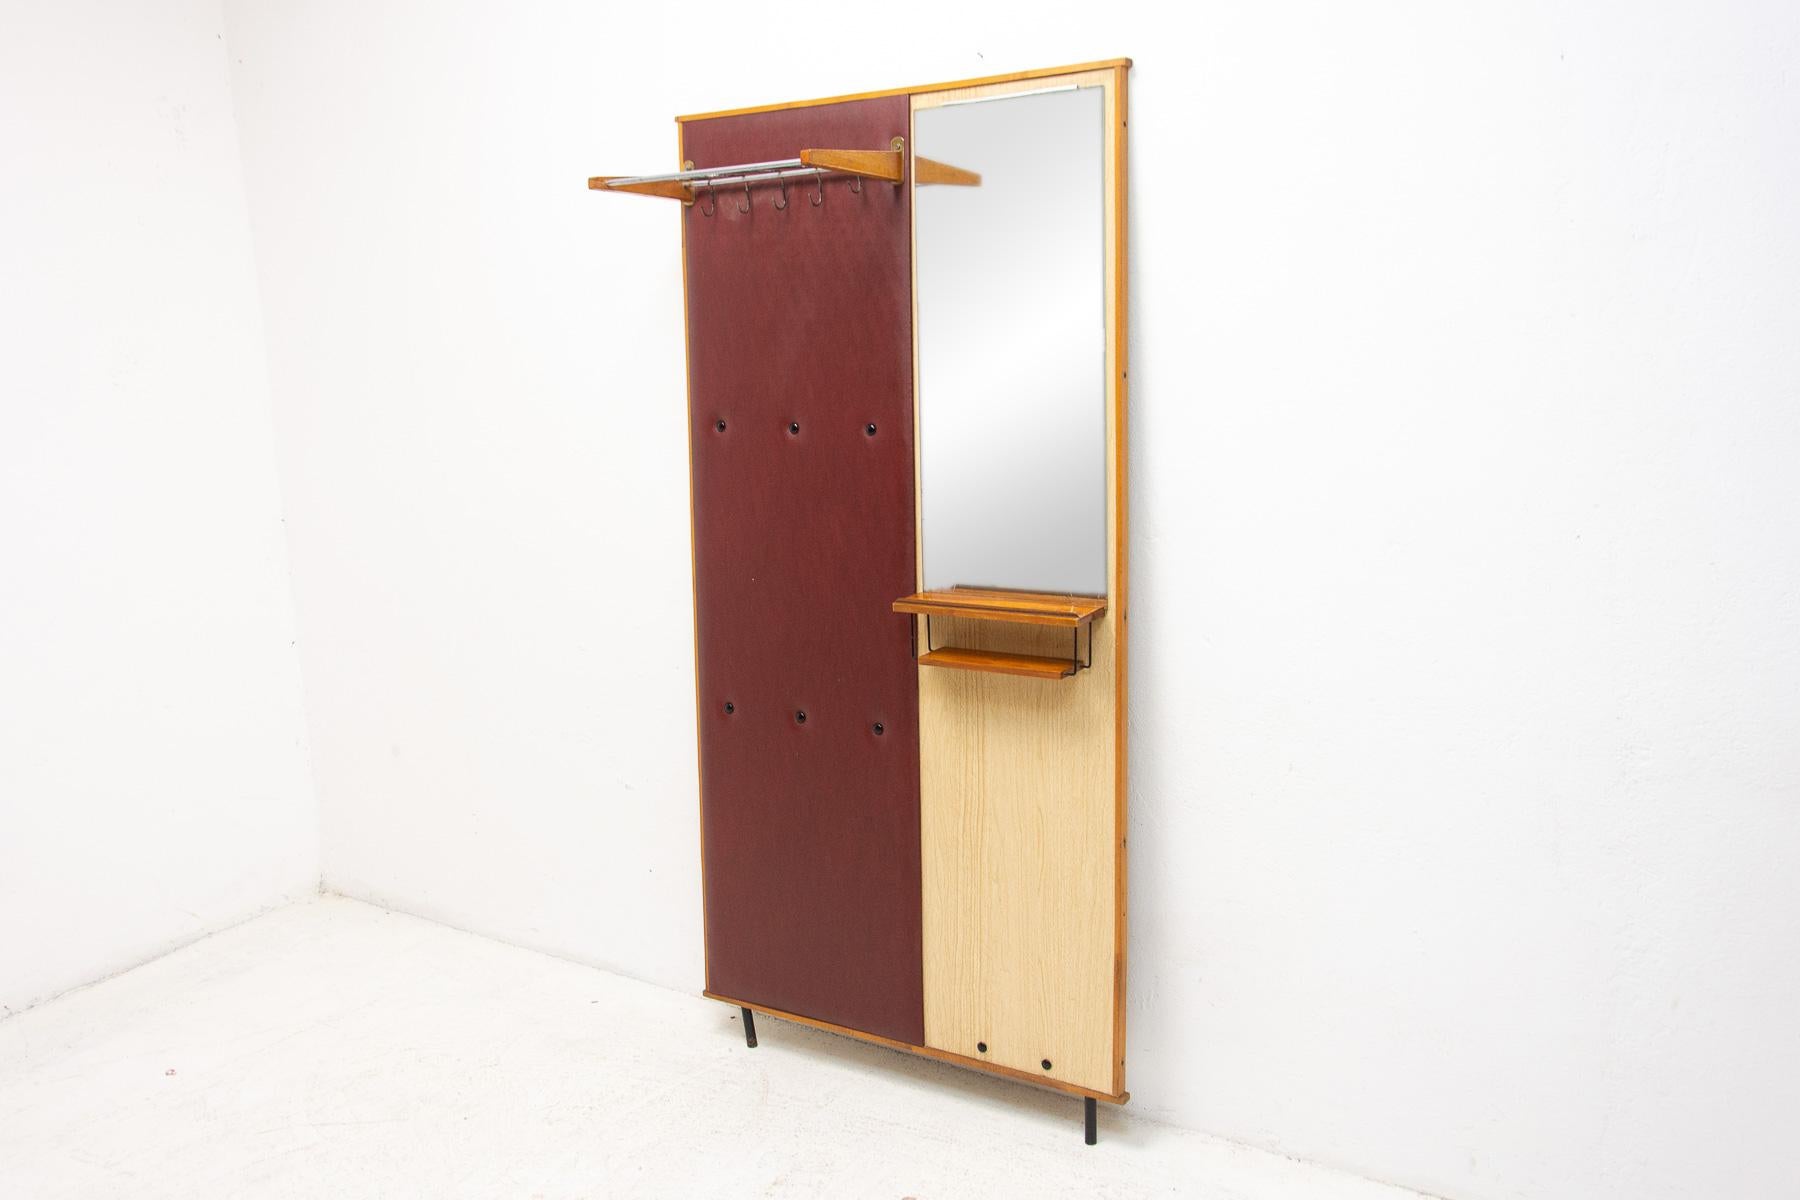 This hall coat rack was made in the former Czechoslovakia in the 1960s and produced by DREVOTVAR. Material: plywood, wood, leatherette, metal. It can be mounted on the wall or laid freely on the floor.

It is a characteristic example of